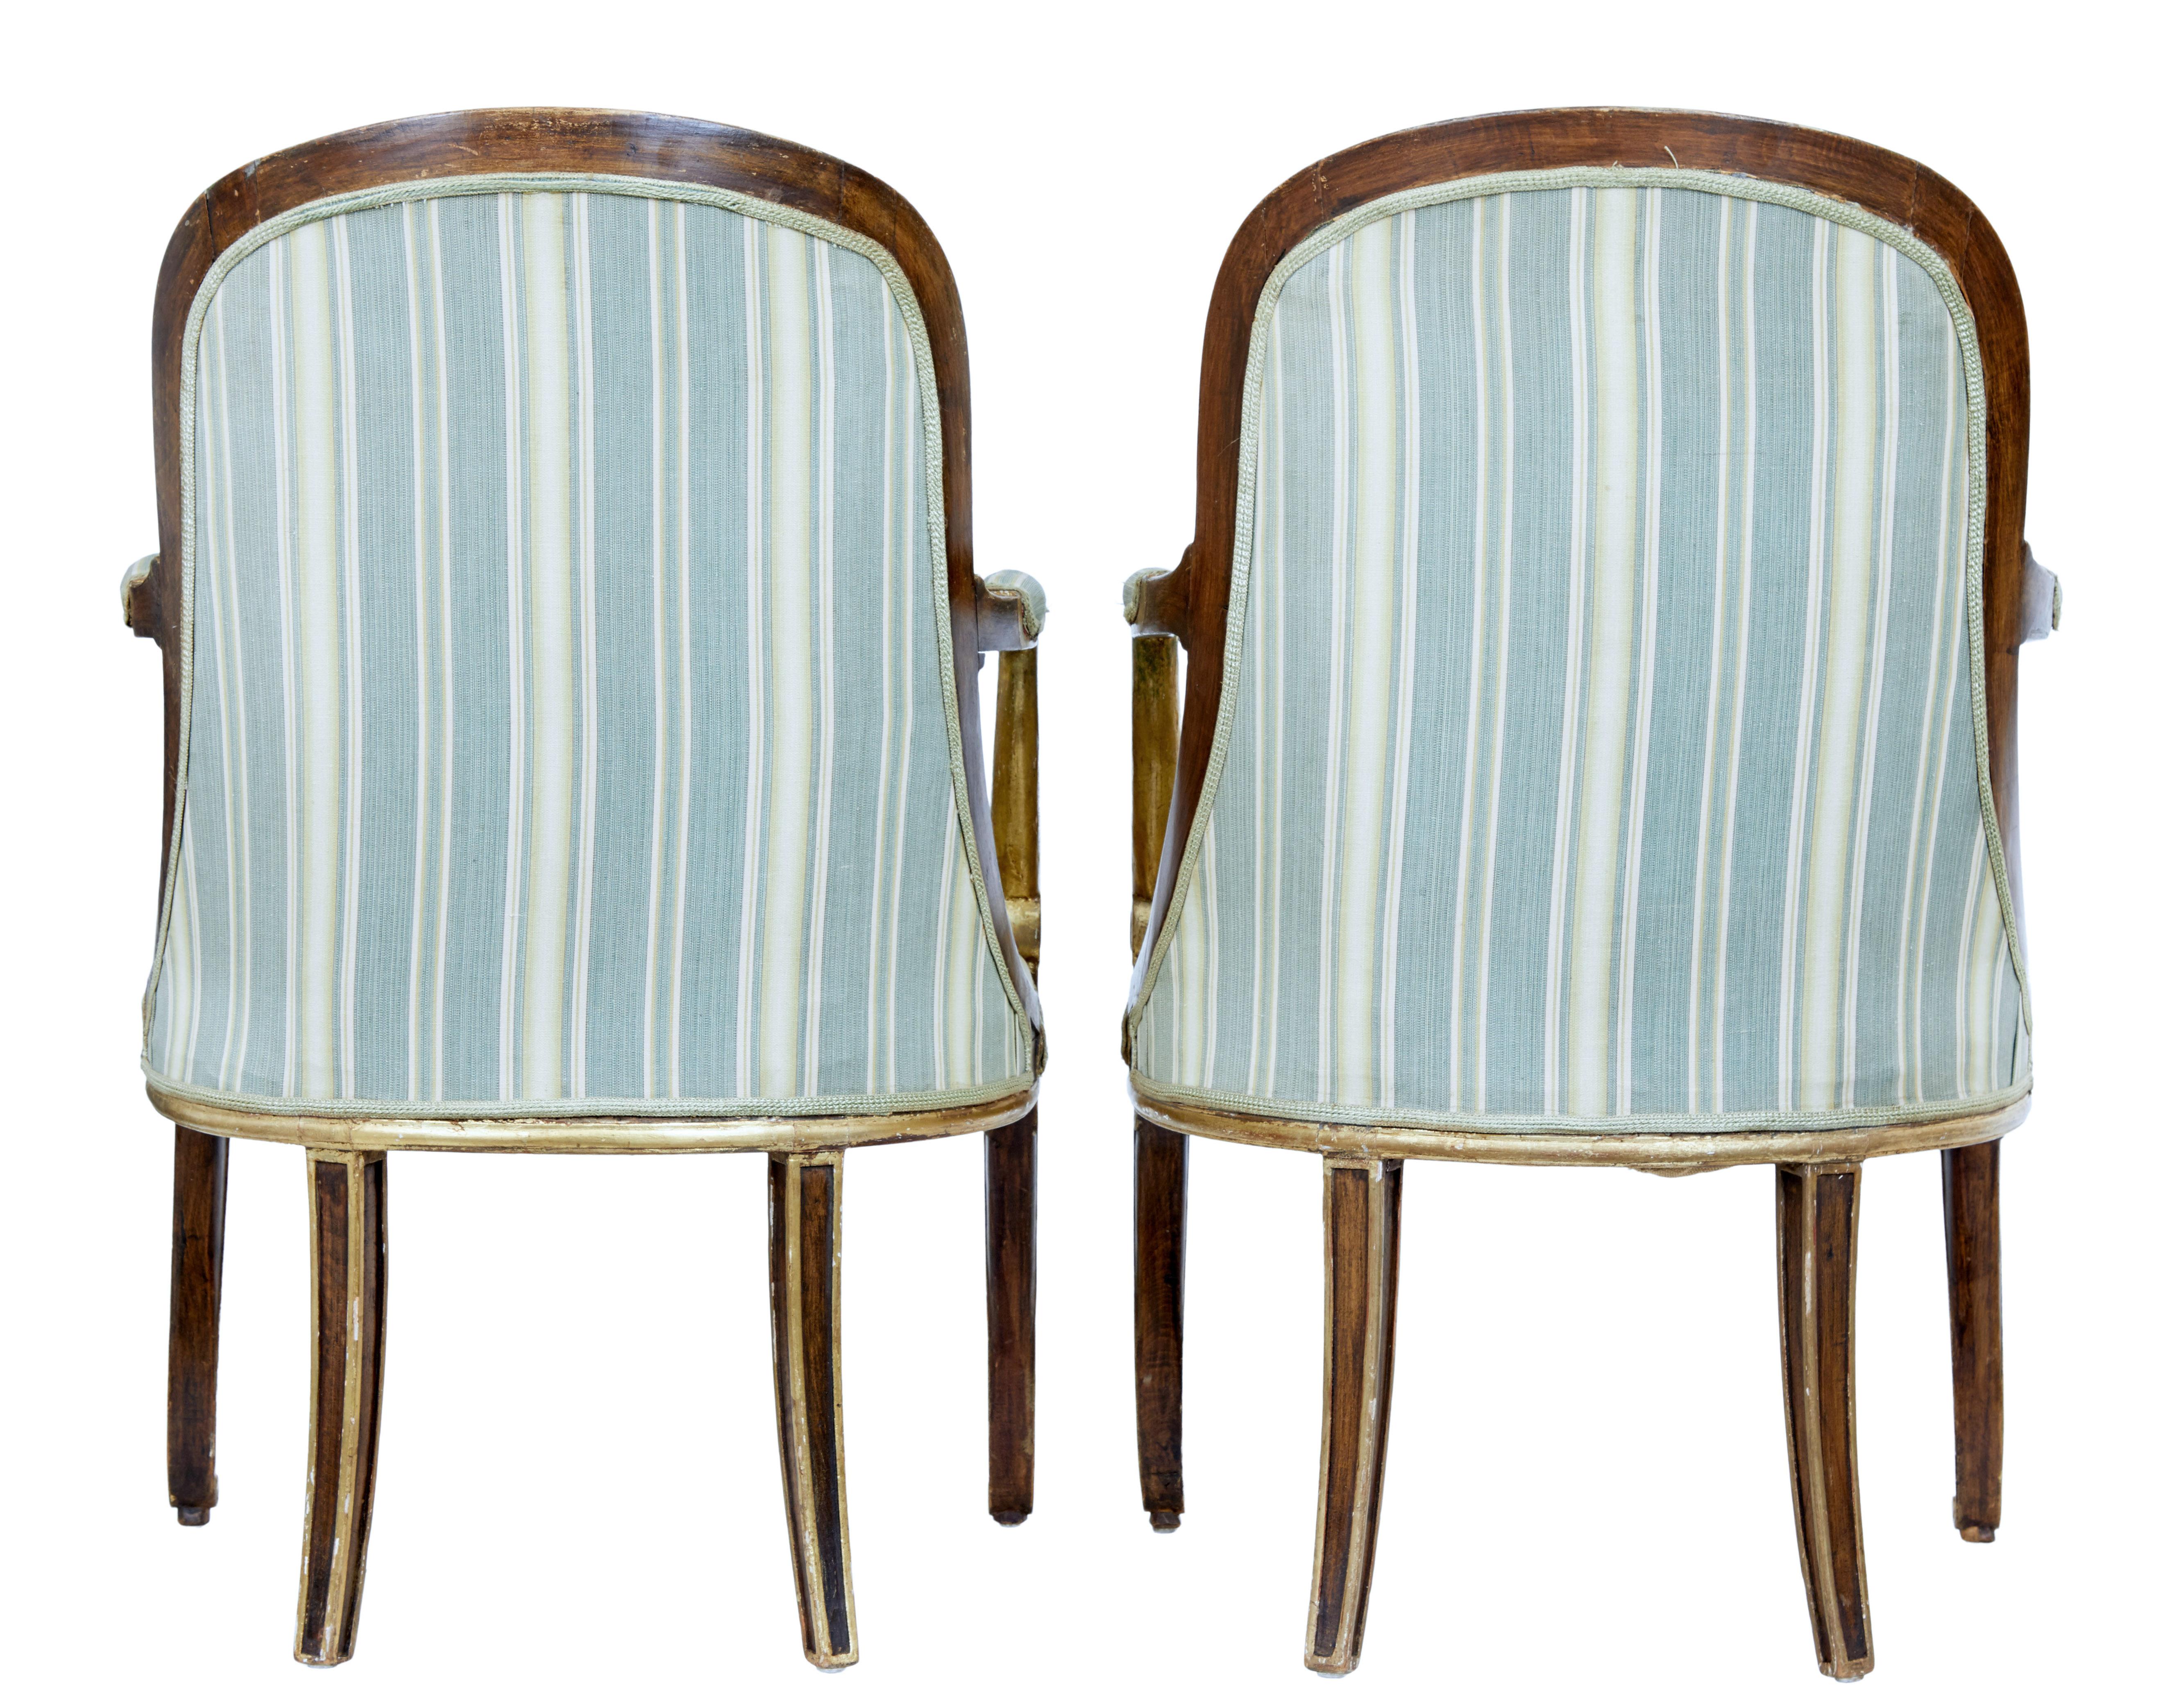 High Victorian Pair of Mid-19th Century French Walnut and Gilt Armchairs